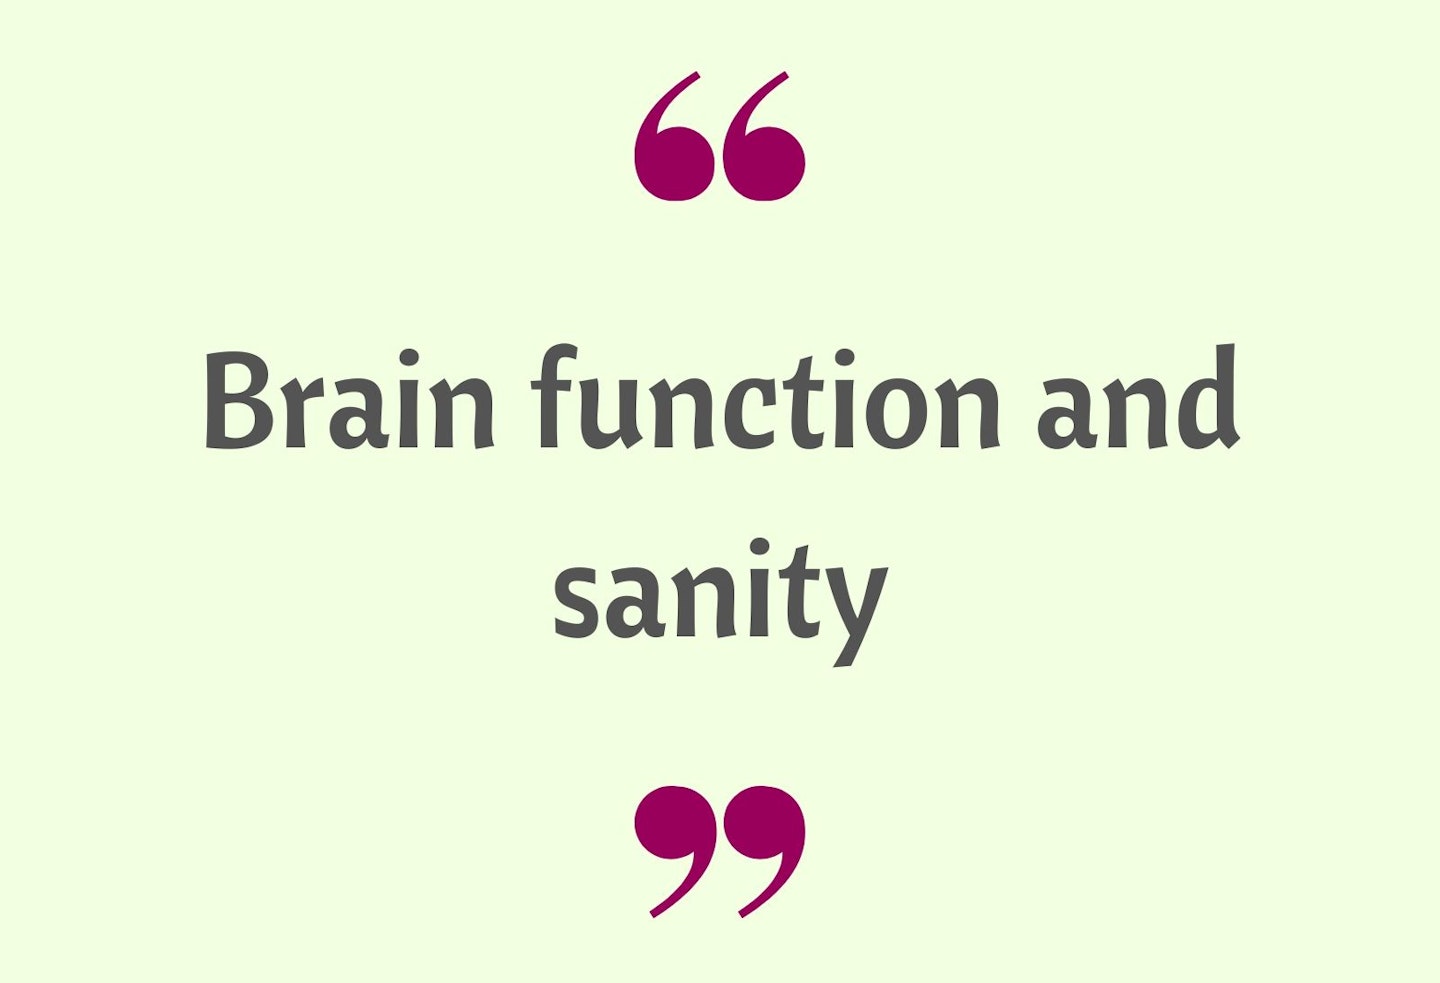 30) Brain function and sanity